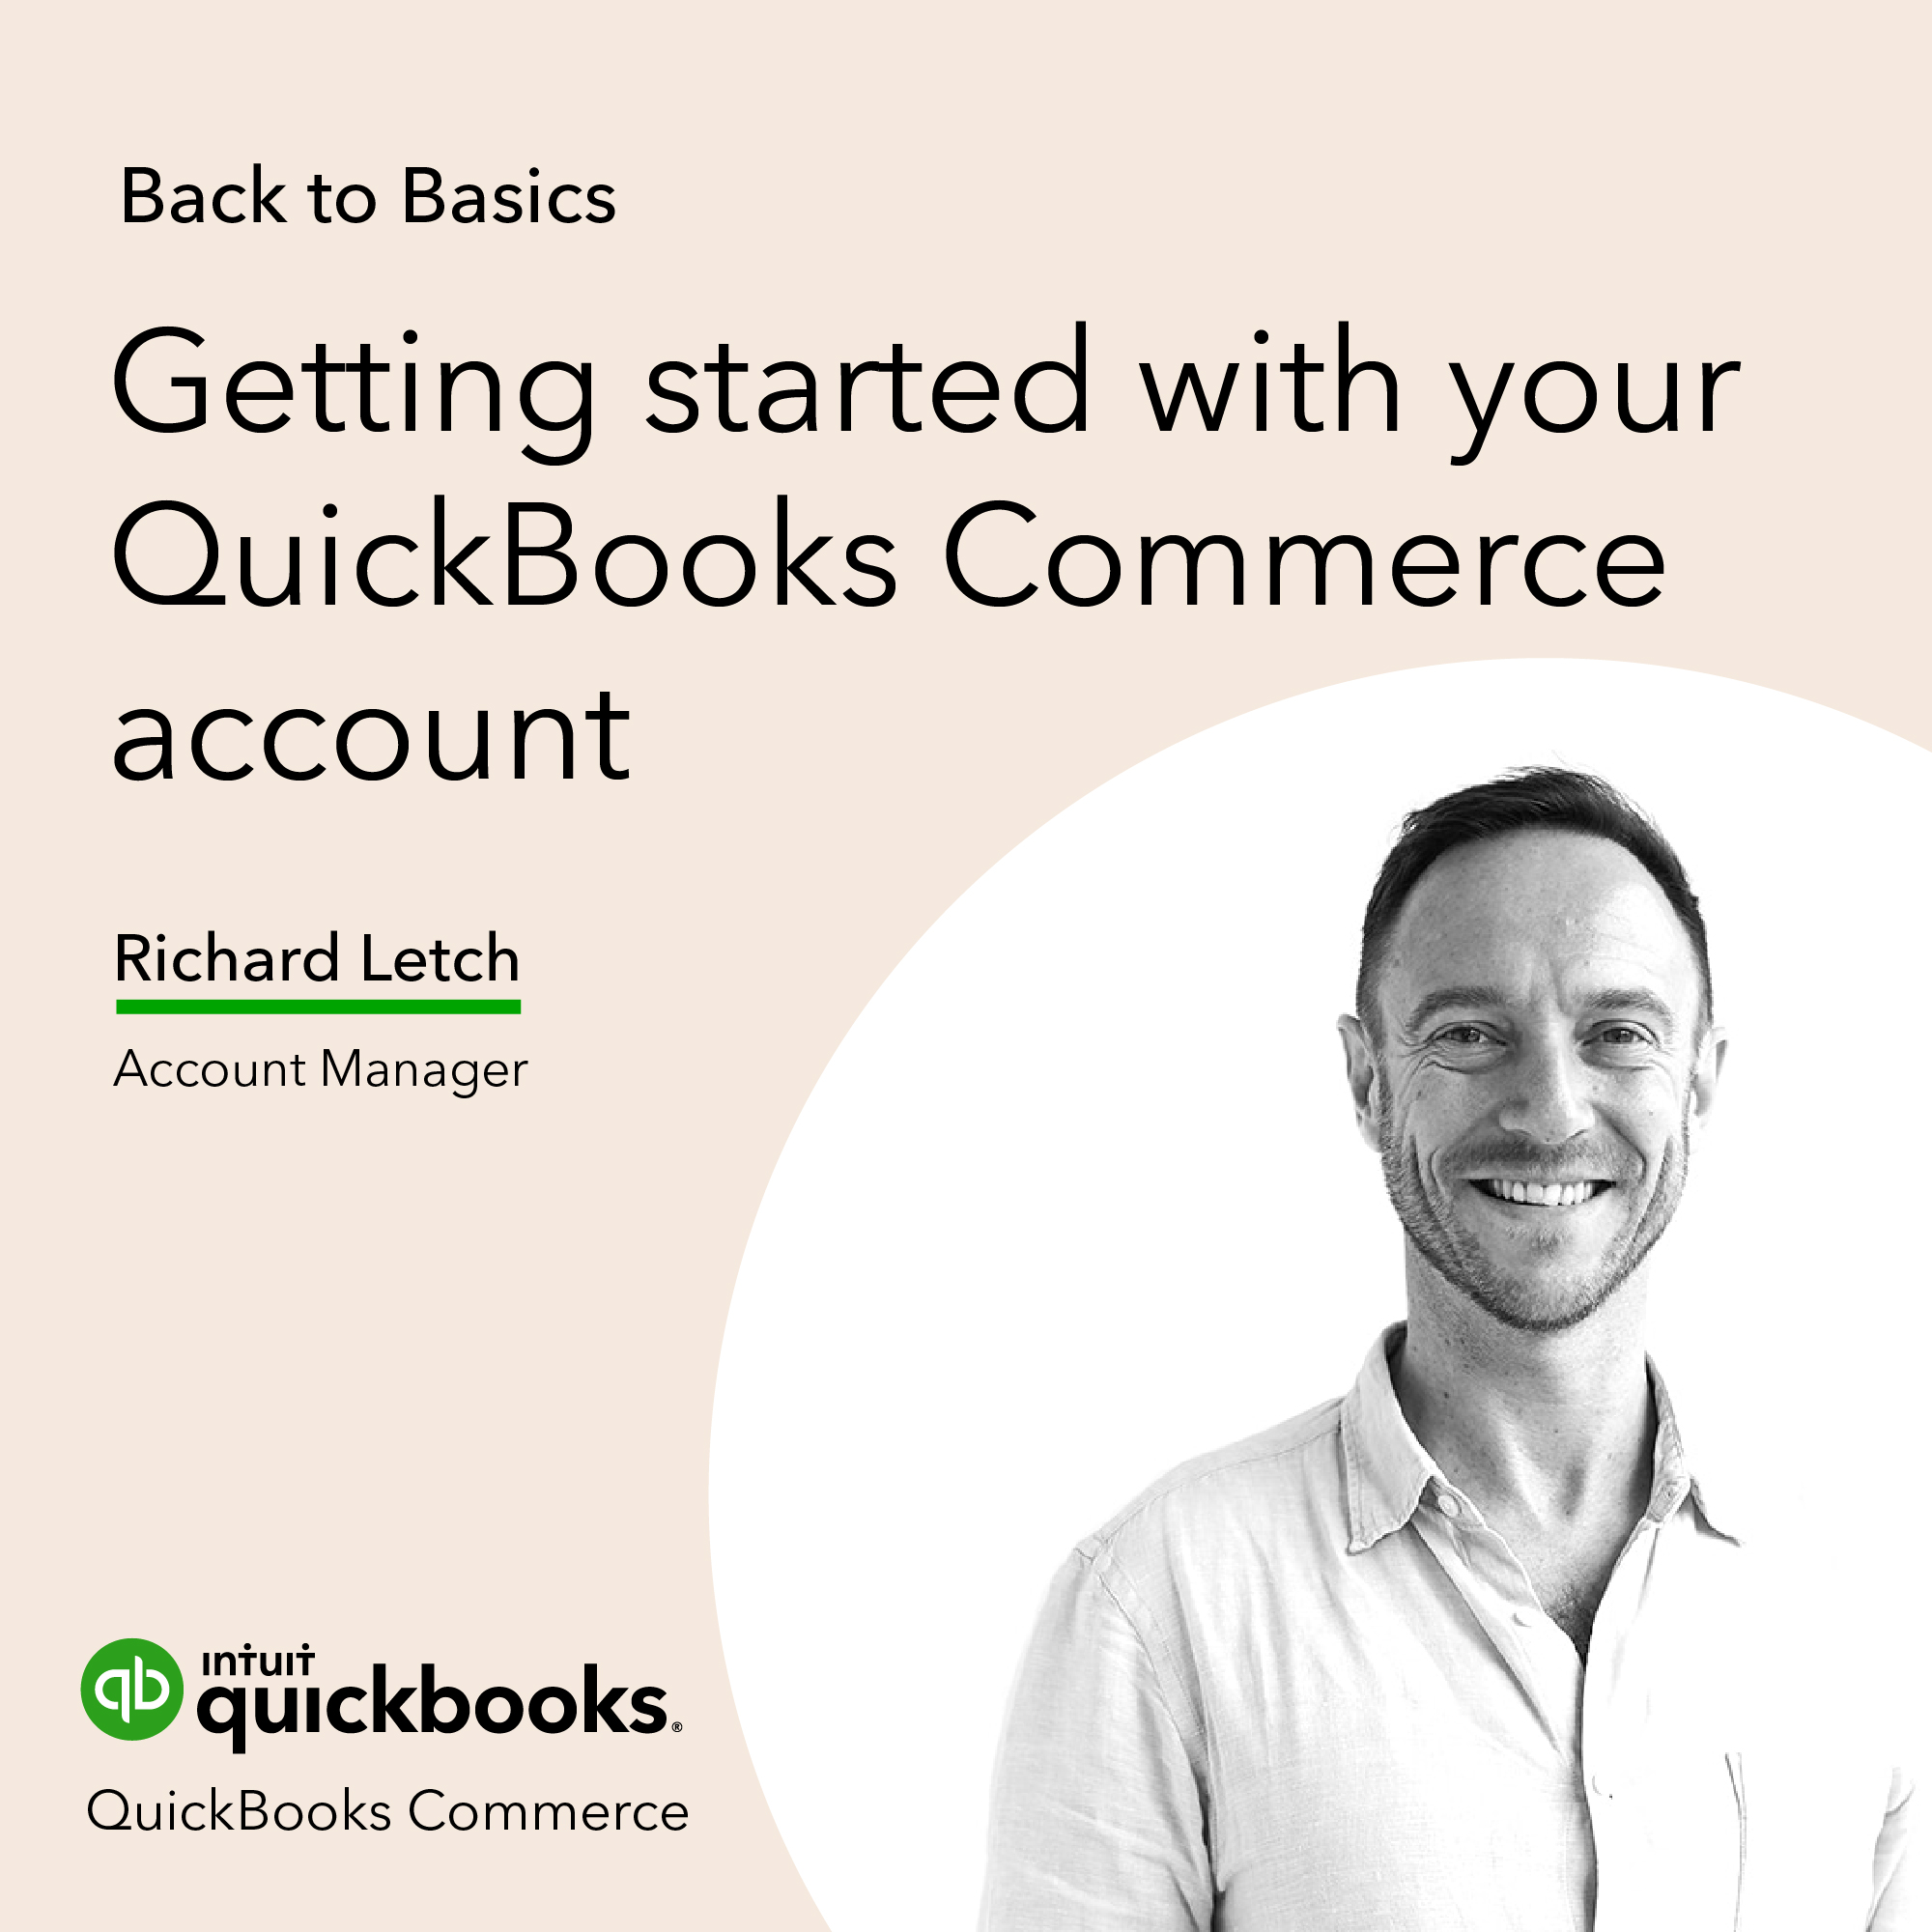 Getting started with your QuickBooks Commerce account